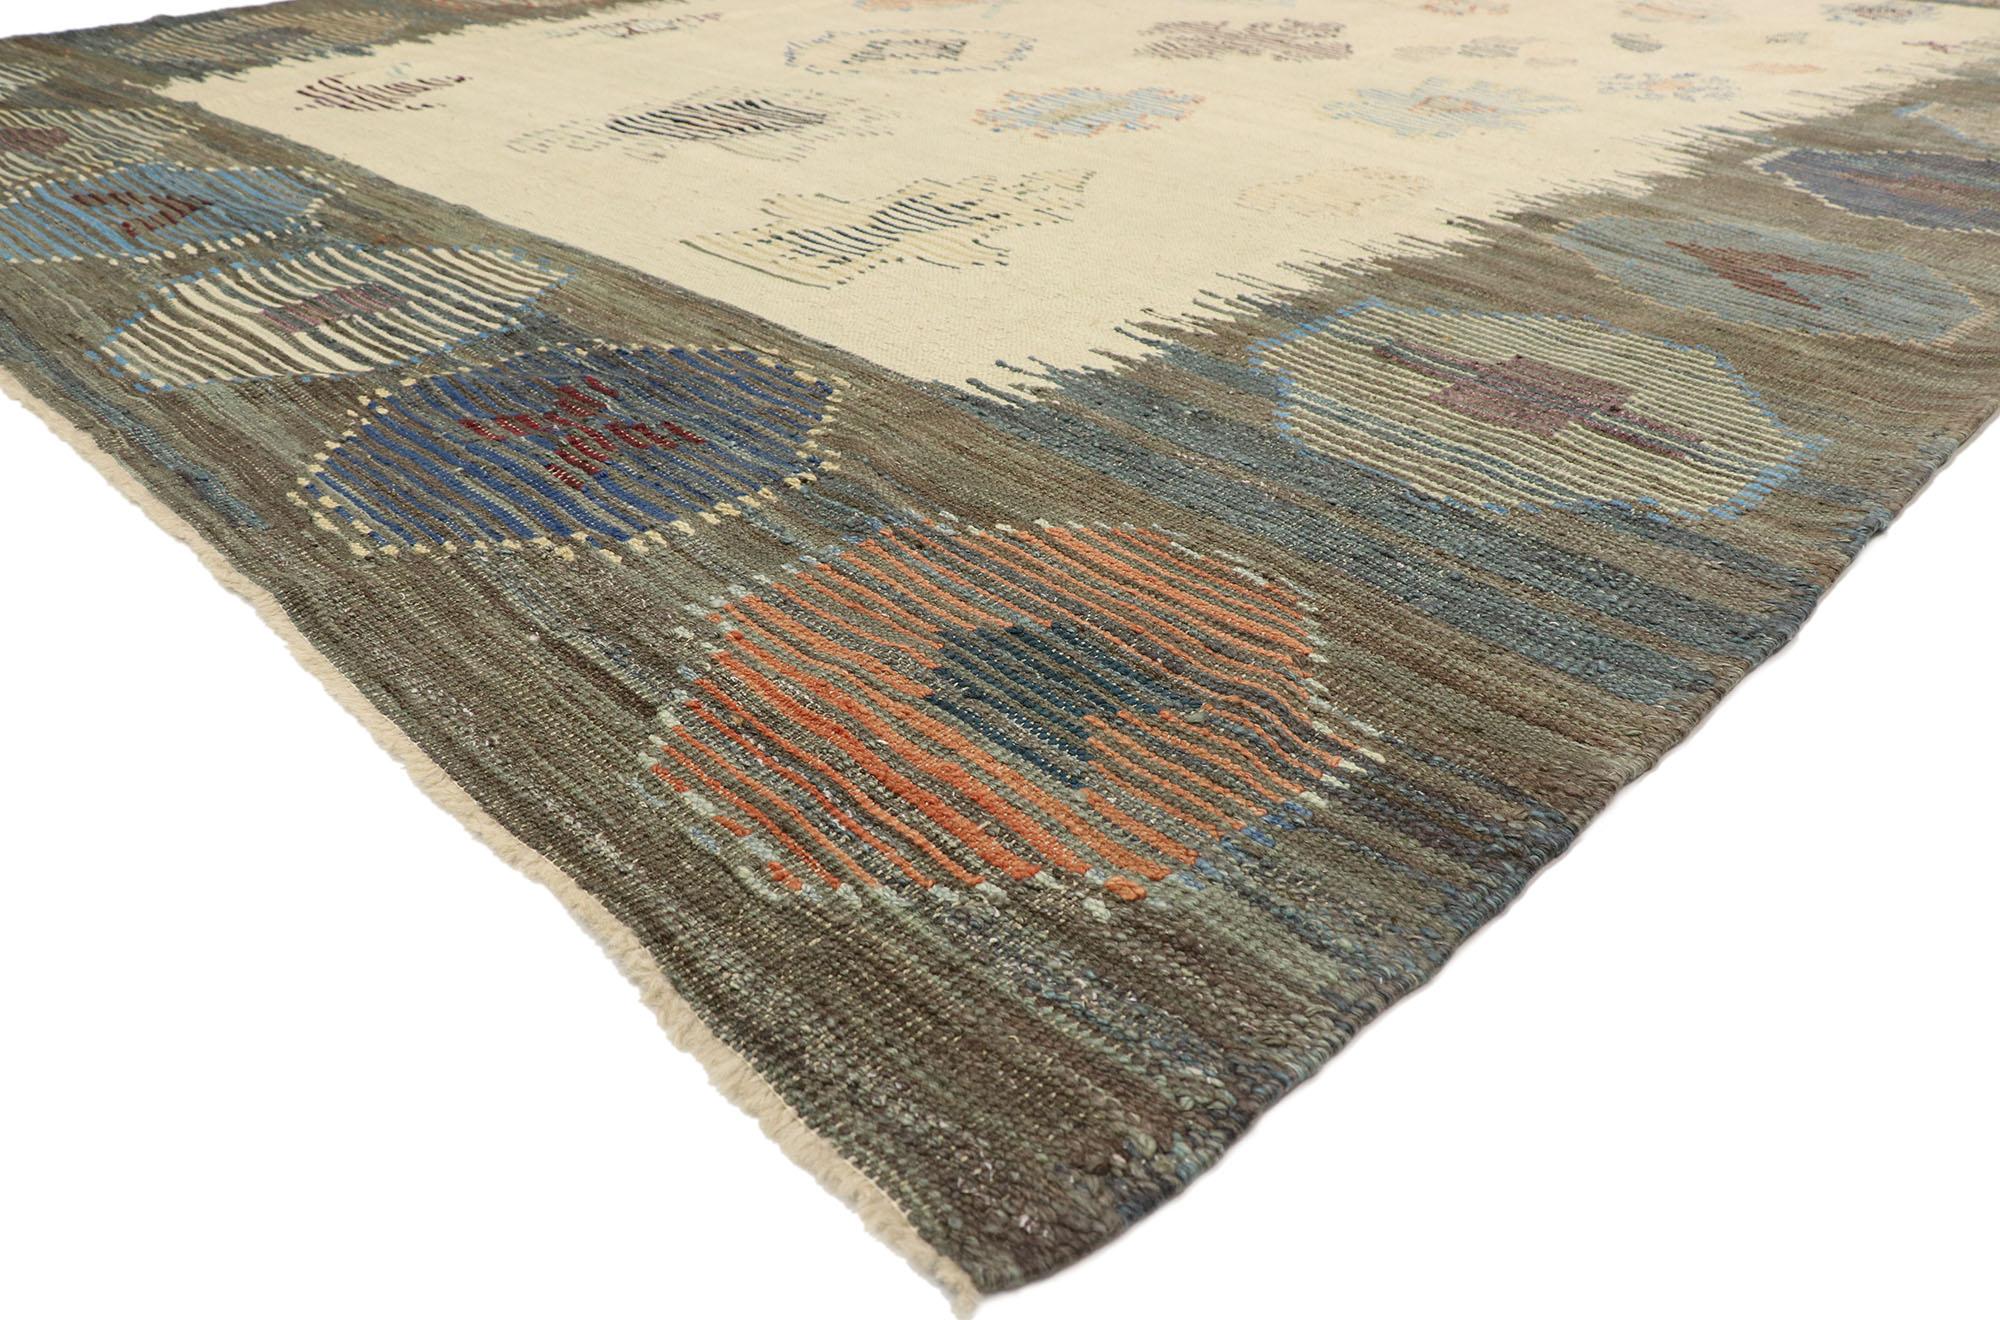 52214 Vintage-Inspired Turkish Kilim Rug, 10'02 x 14'02.
Wabi-Sabi meets rustic boho in this handwoven vintage-inspired Turkish kilim rug. The distinctive tribal elements and warm earthy colors woven into this piece work together creating a cultured